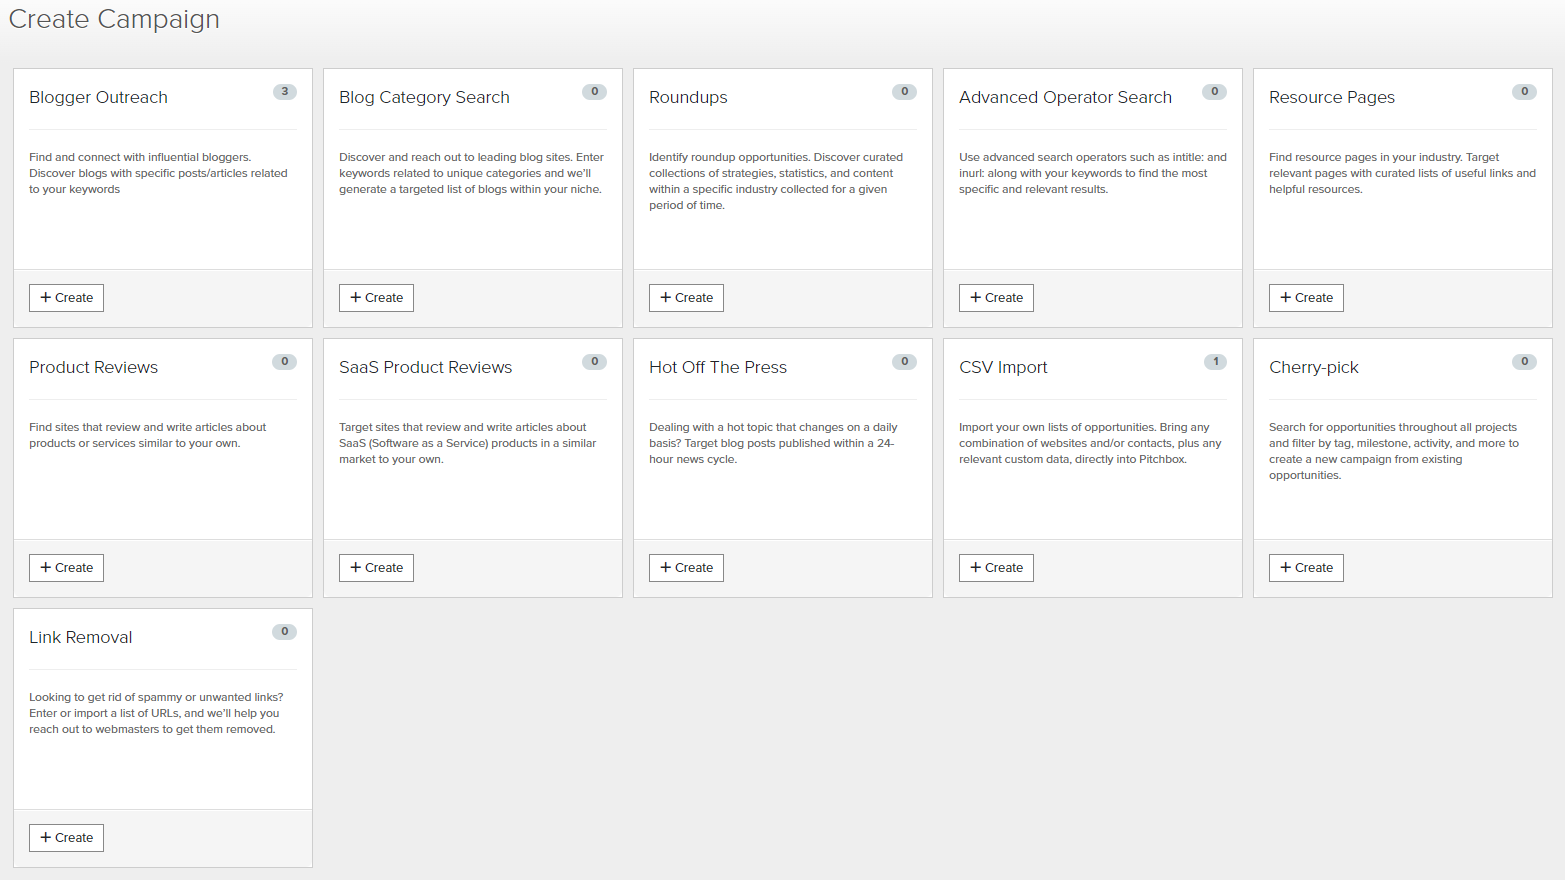 A selection of the options available for creating a campaign in Pitchbox